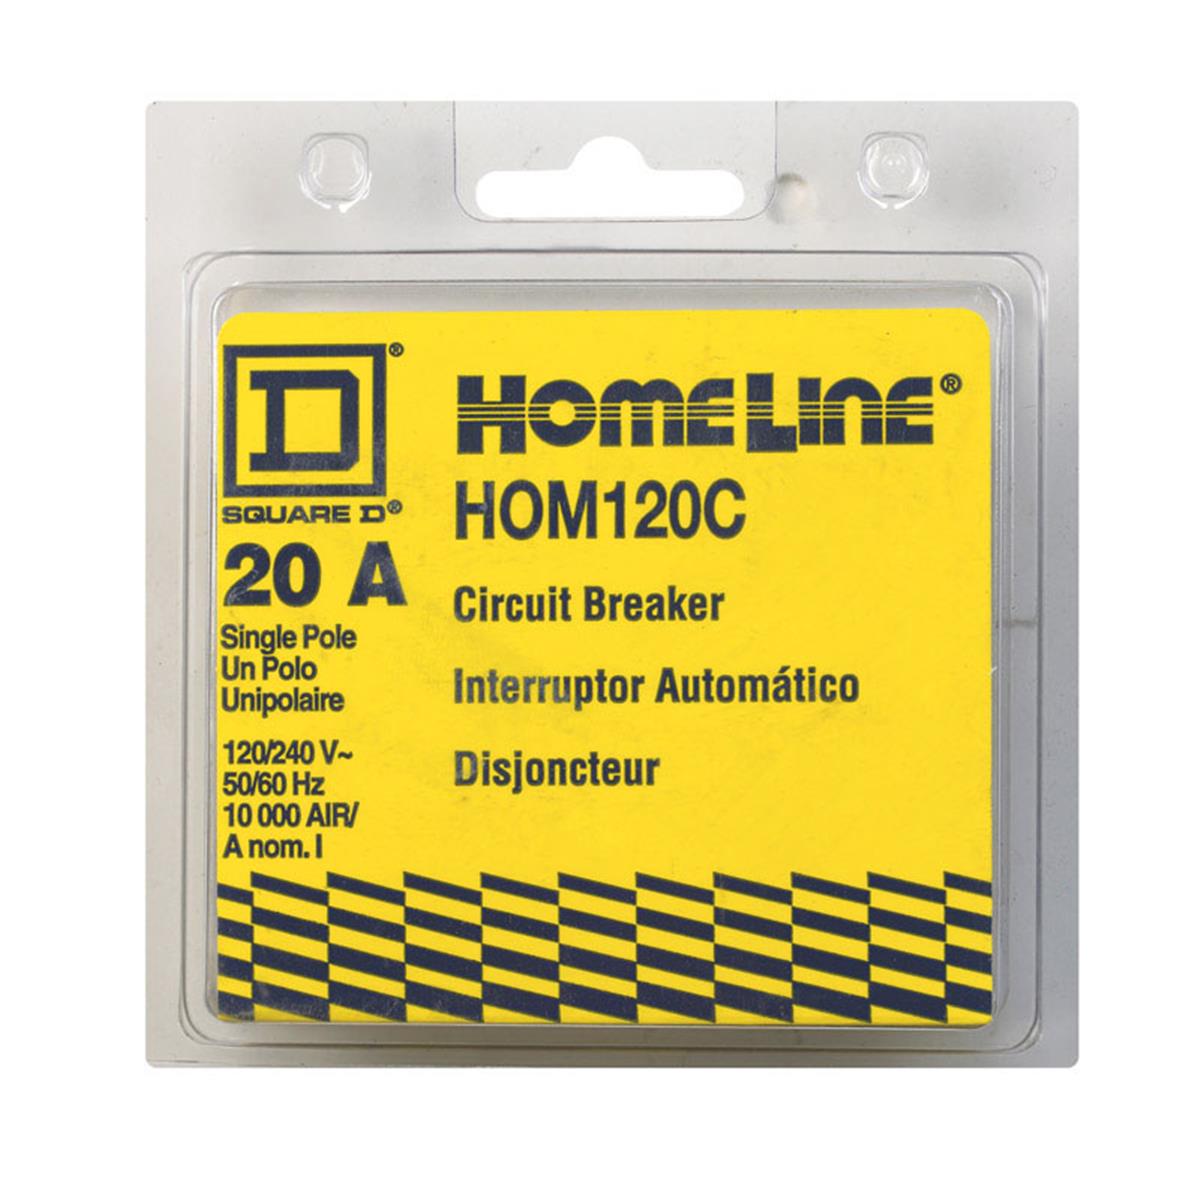 Hom120c 1 In. 20 A, 1- Pole Homeline Ground Fault Circuit Breaker